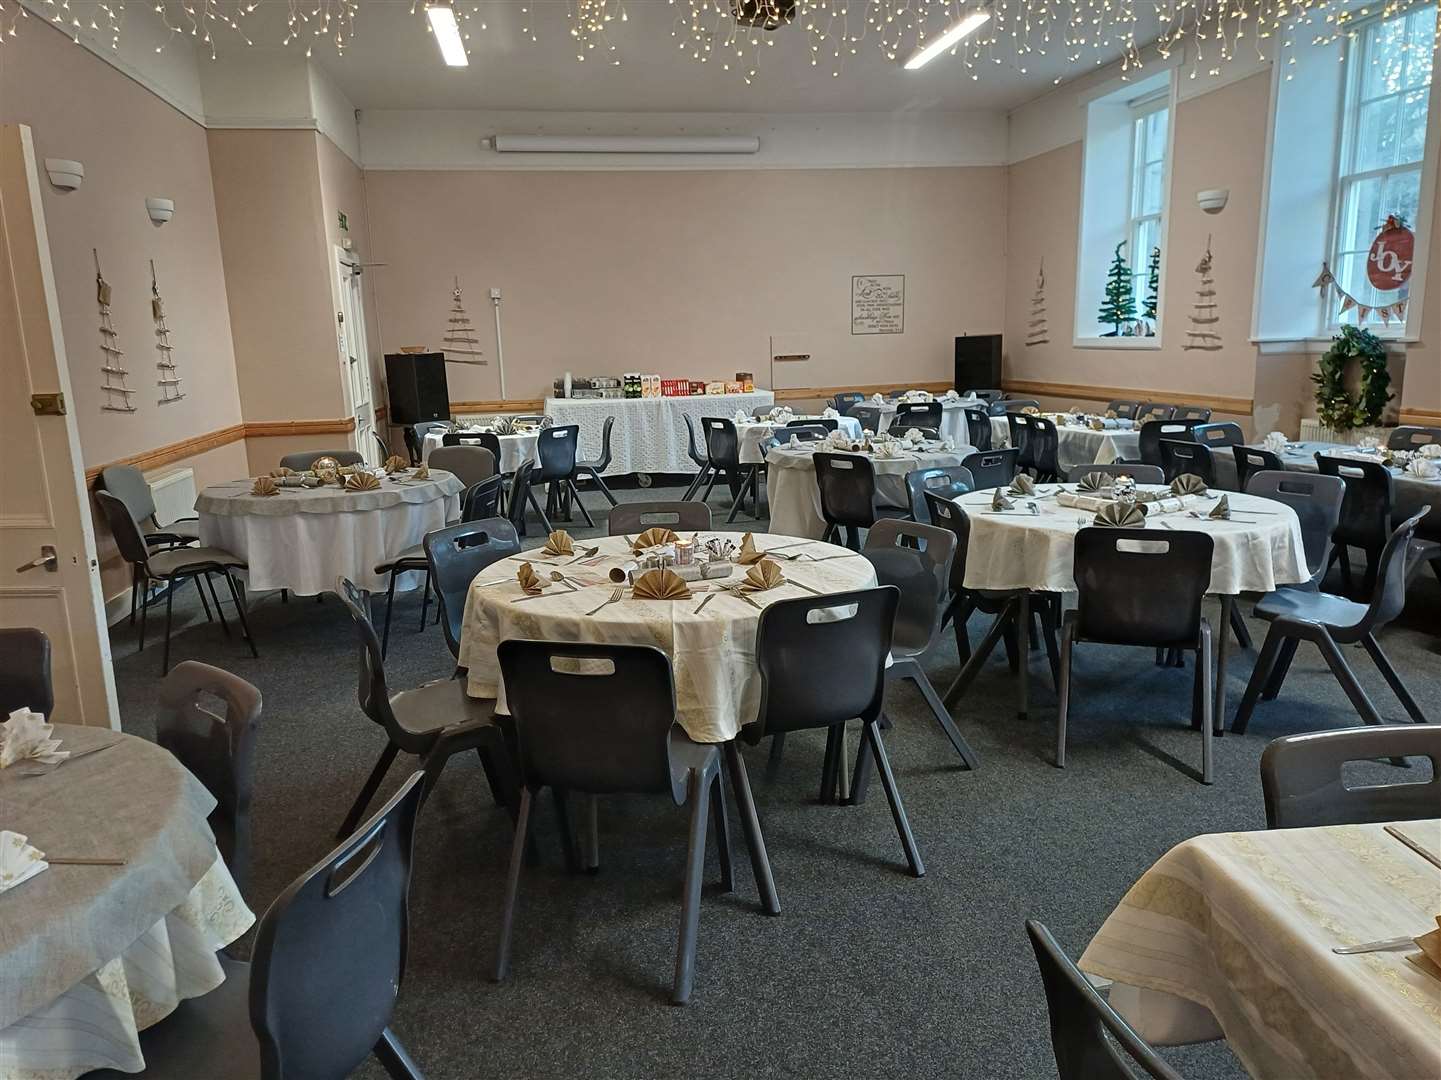 The Boxing Day meal was hosted at Banff River Church.